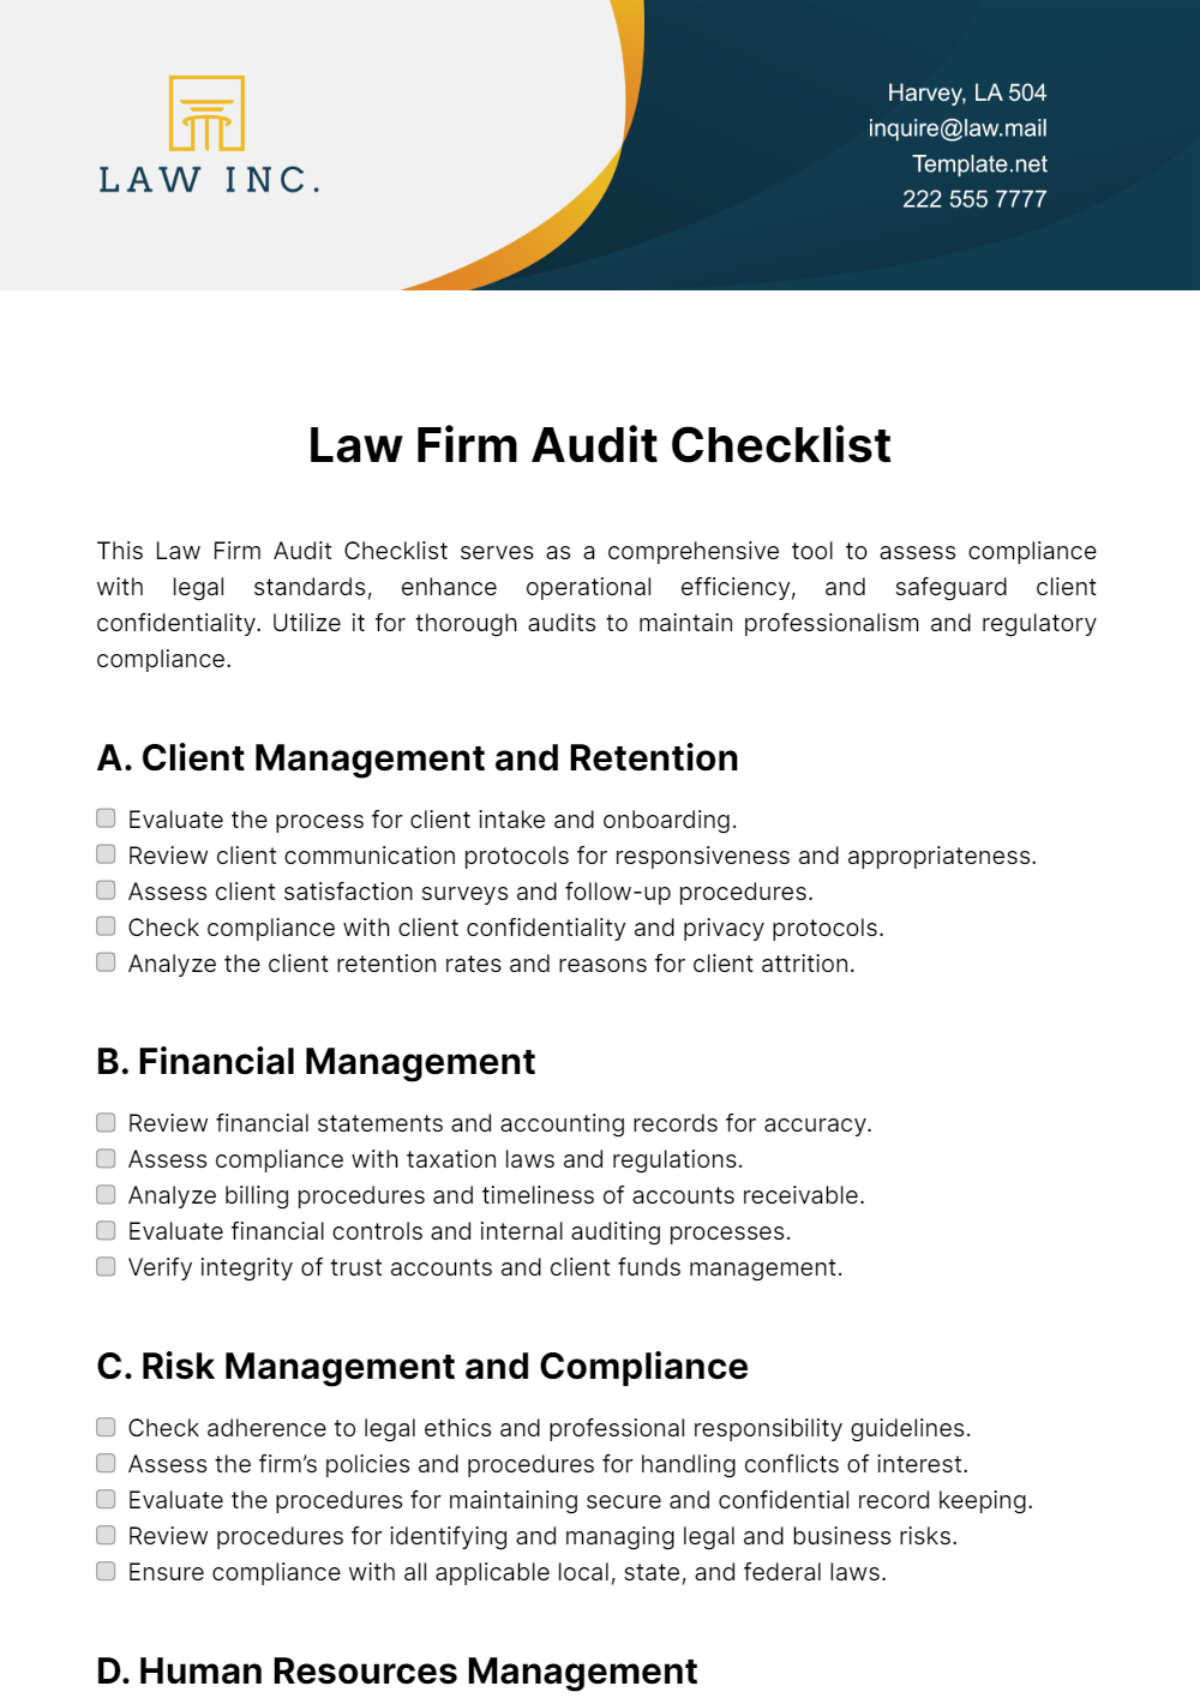 Free Law Firm Audit Checklist Template